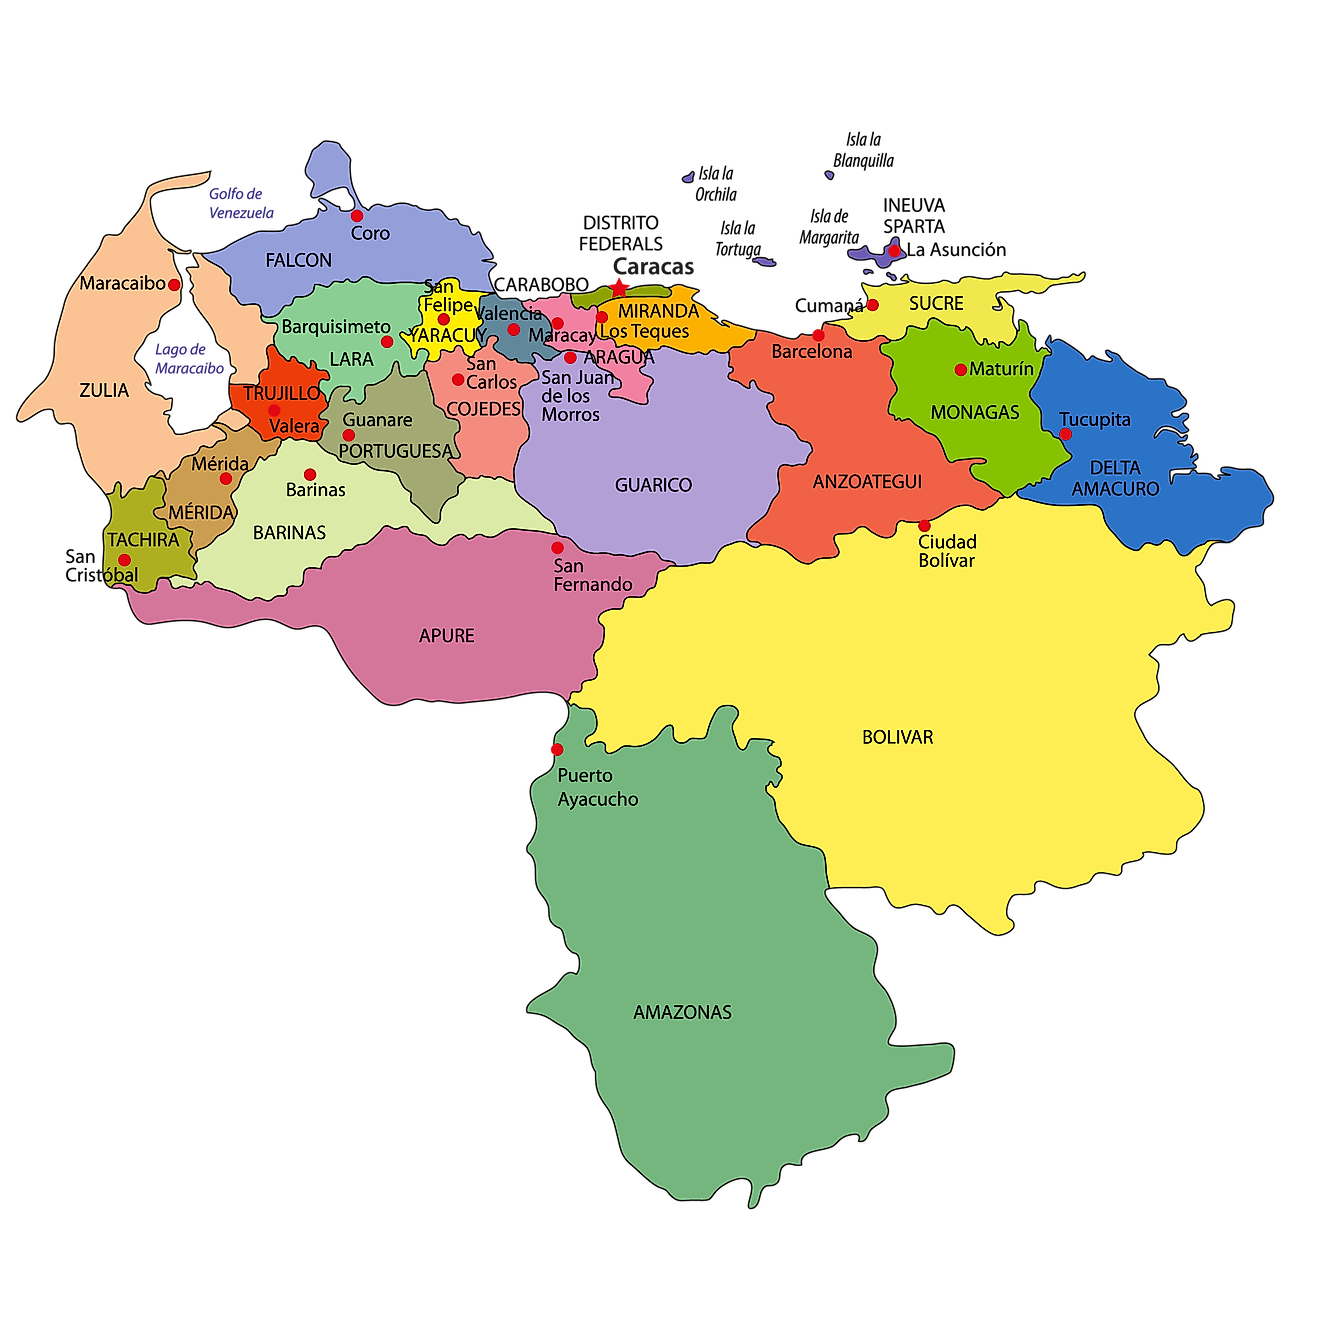 Political Map of Venezuela showing its 23 states, 1 capital district and the Federal Dependencies and the capital city - Caracas